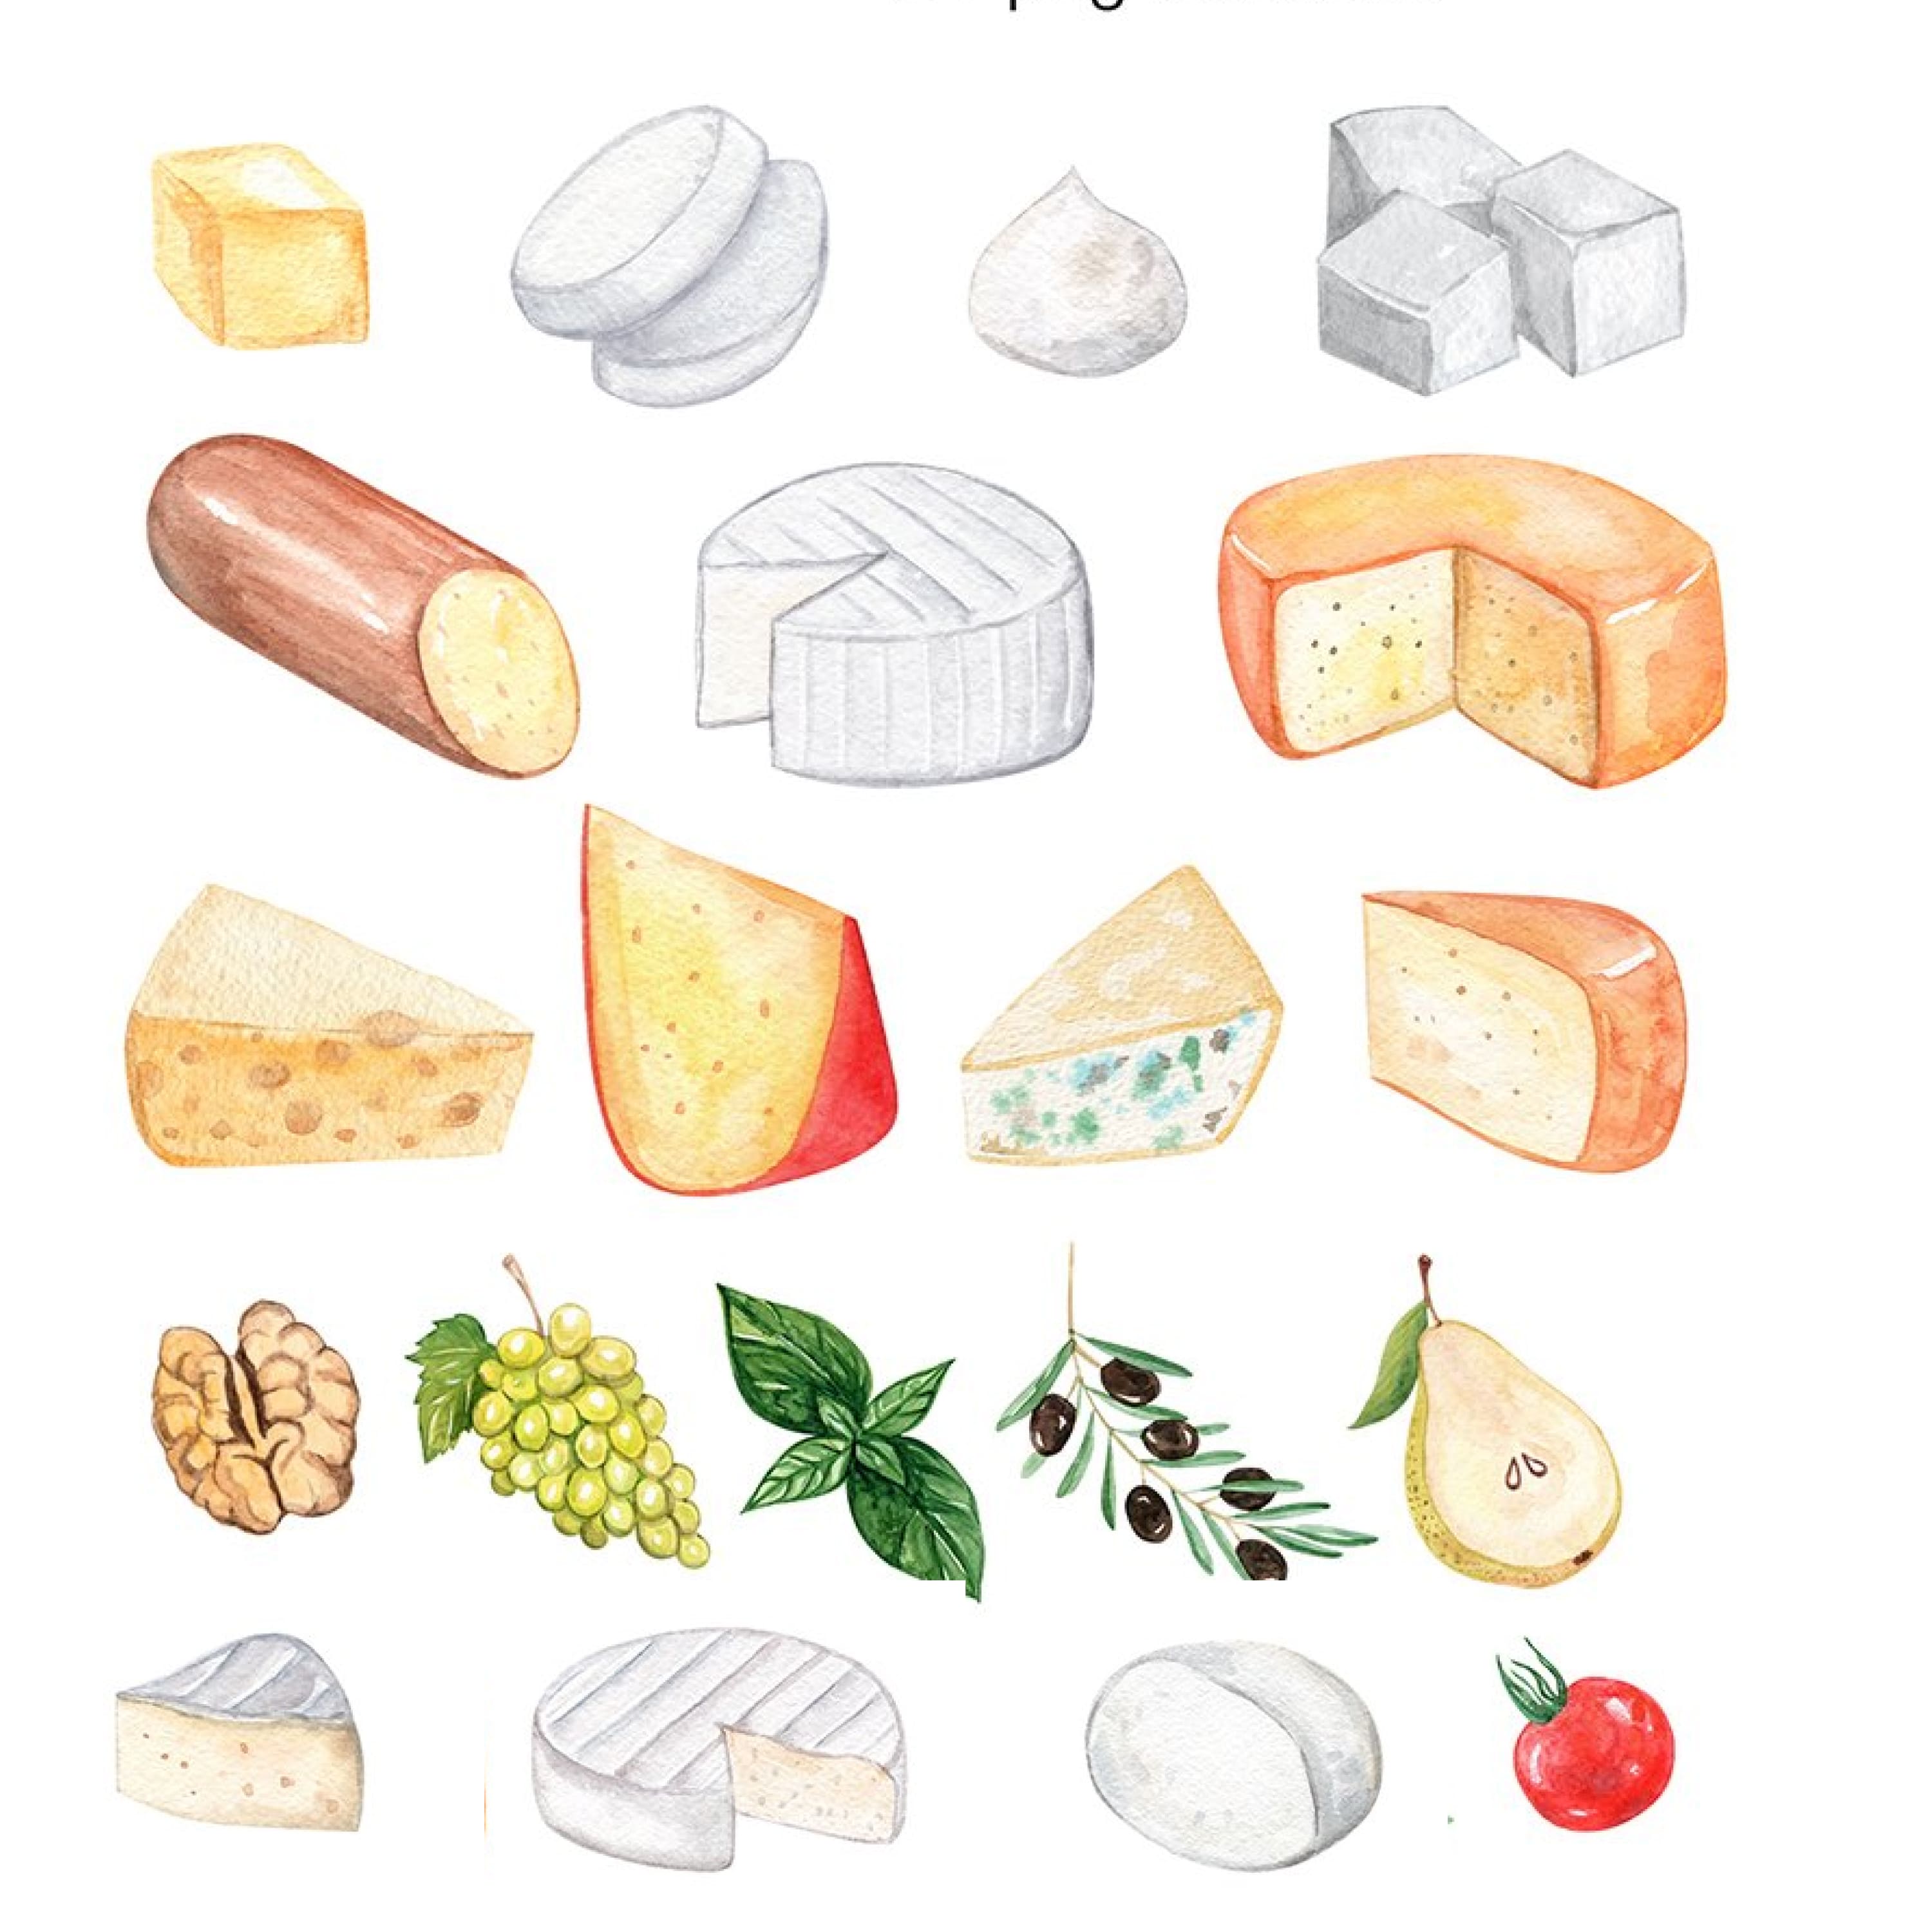 A selection of lovely images of hard cheese and fruit.